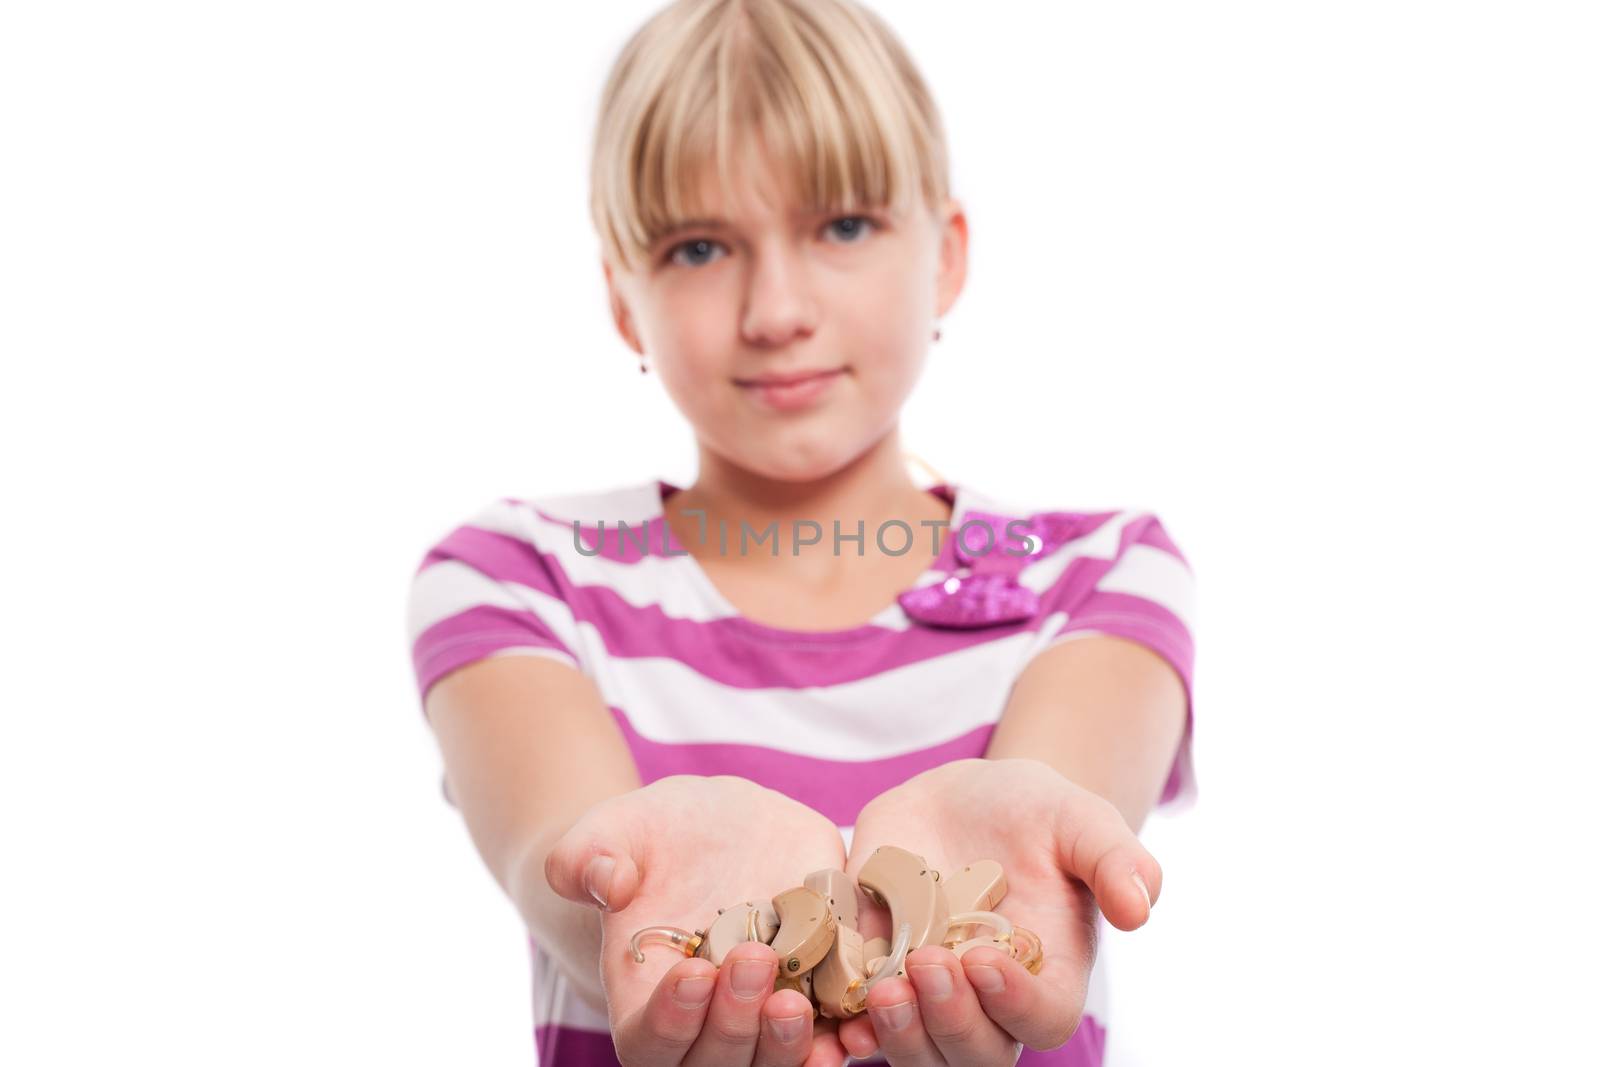 Hearing aids - Teen girl holding lots of hearing aids in her hands. Isolated on white